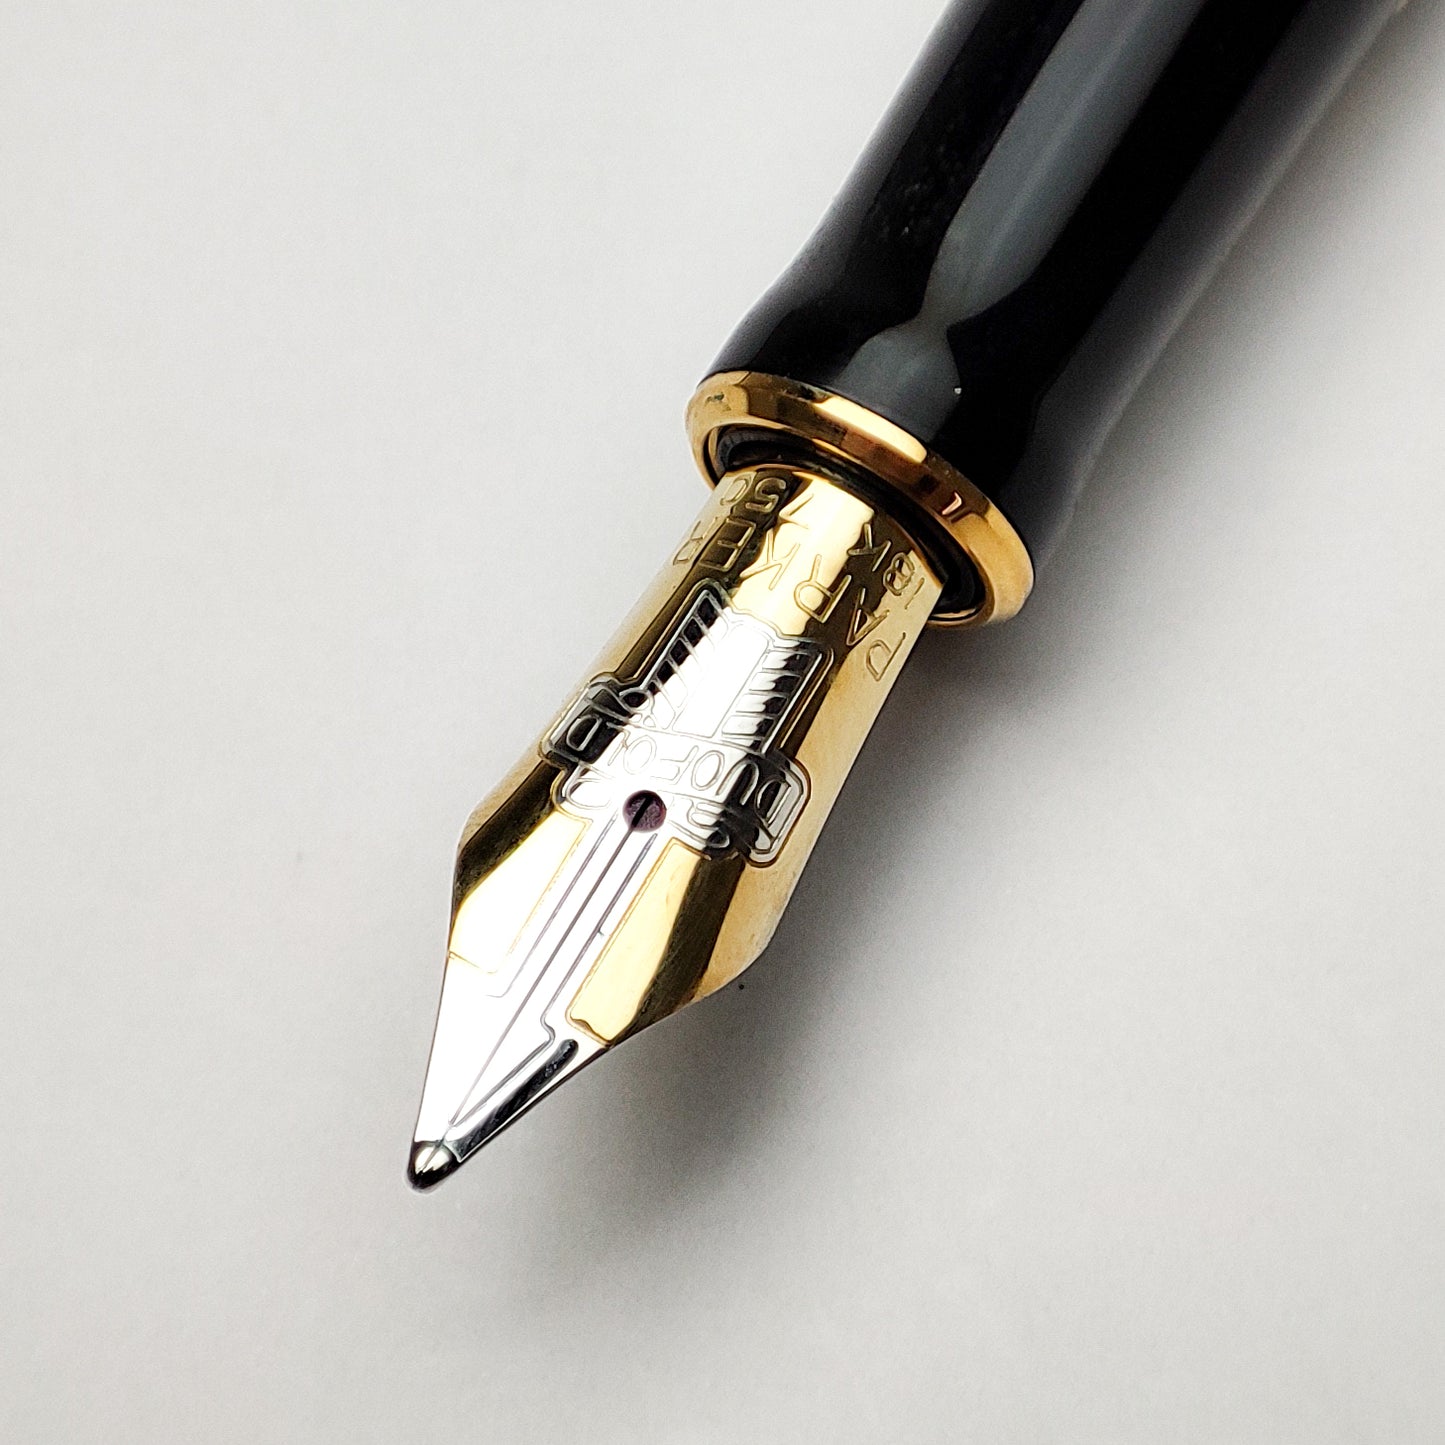 PARKER DUOFOLD INTERNATIONAL M.FULTZ REPLICA PEARL SWIRL 14K GOLD BAND LIMITED EDITION X/88 FOUNTAIN PEN (2005)